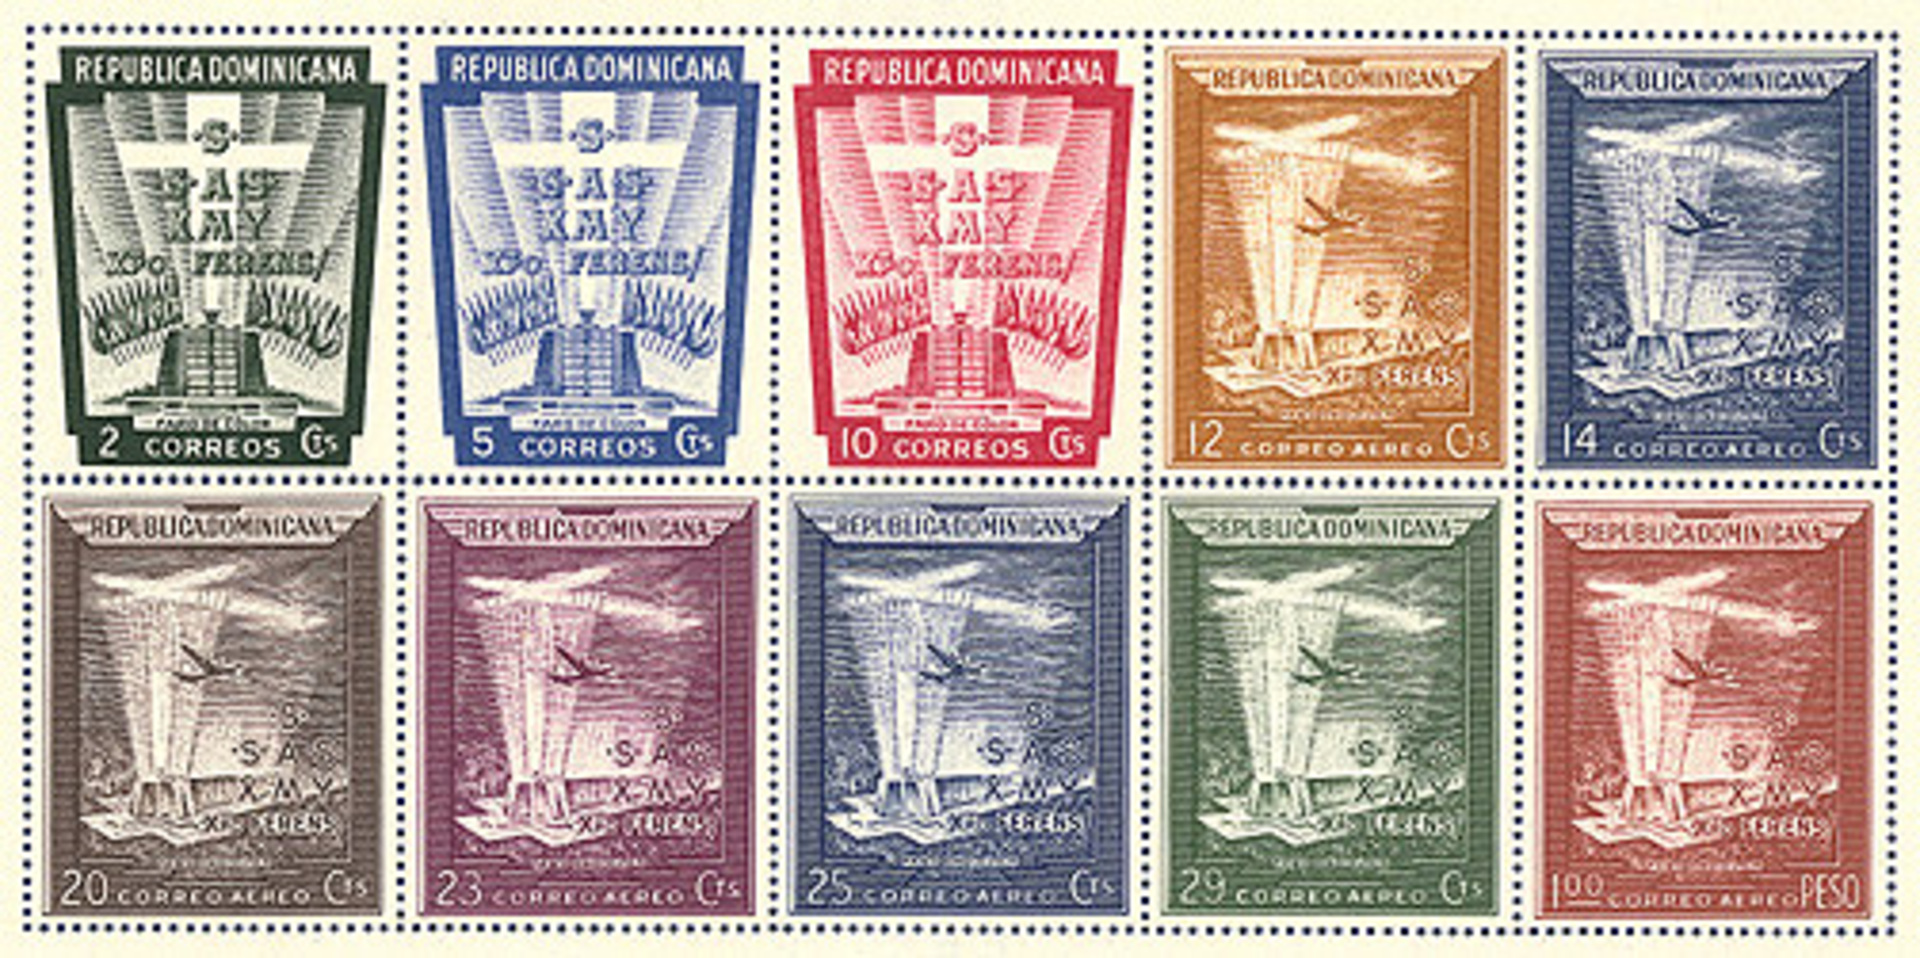 Columbus Lighthouse stamps